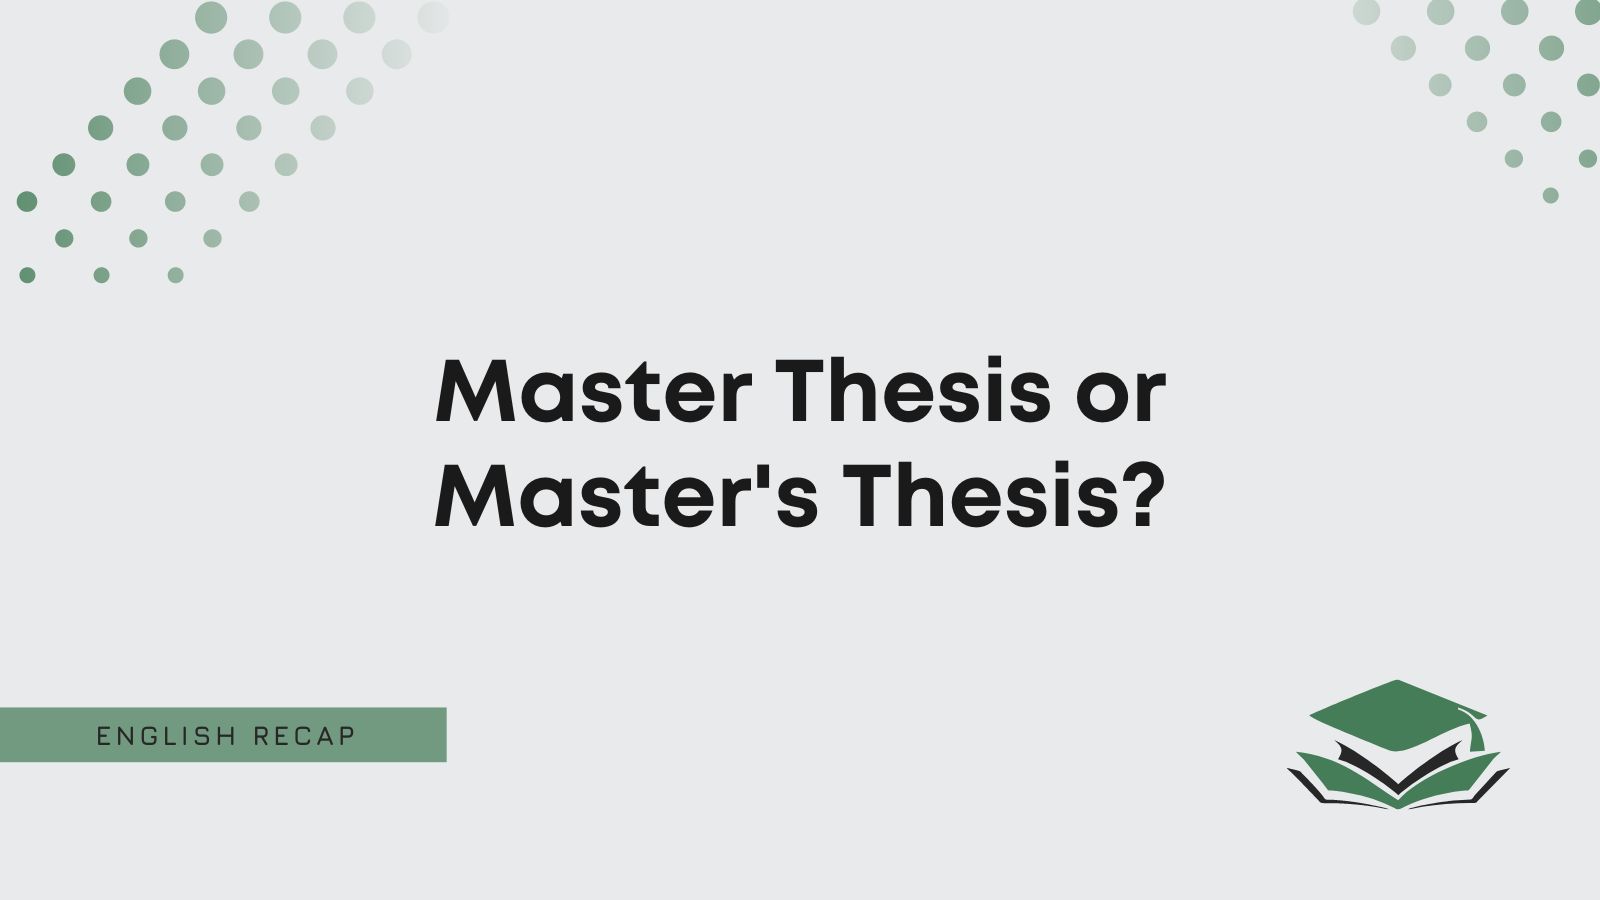 master thesis on or about